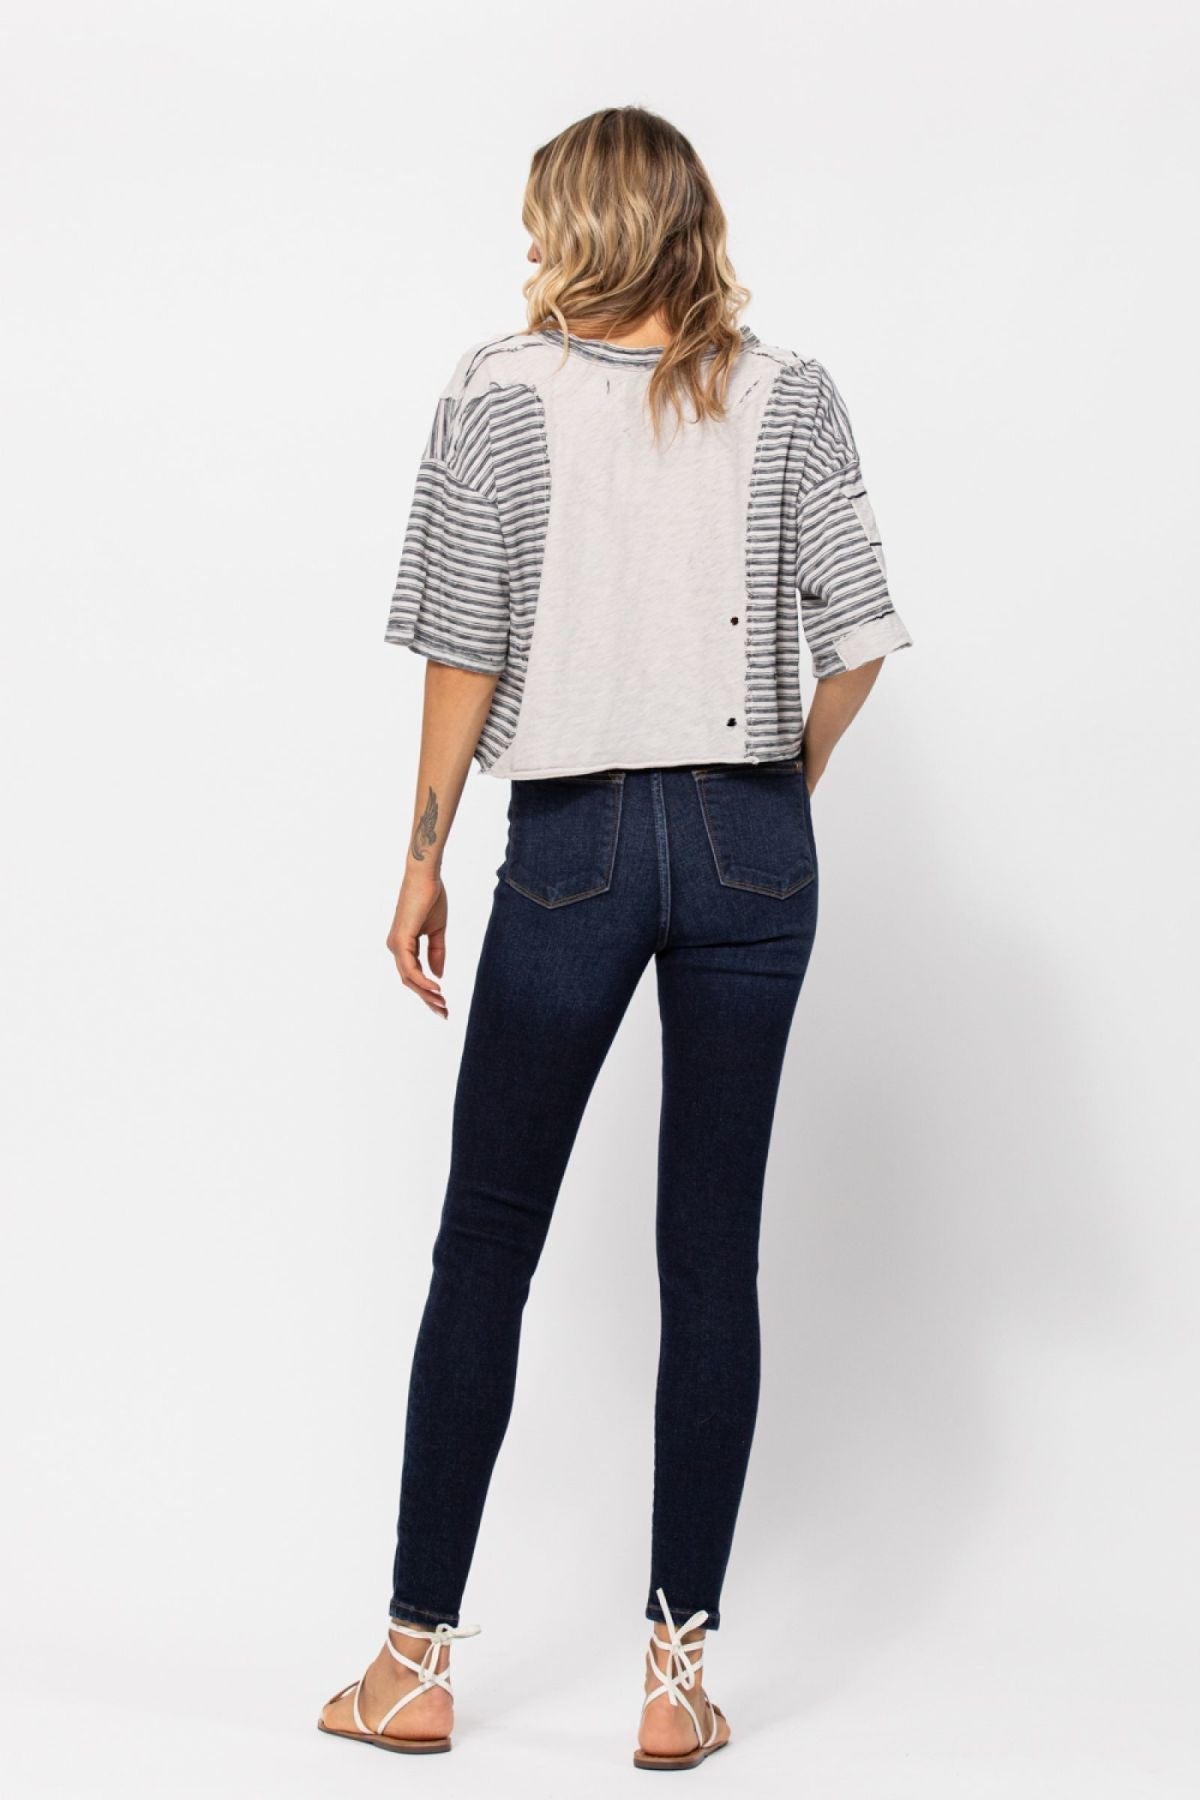 Judy Blue High Rise Skinny Jeans with Handsanding